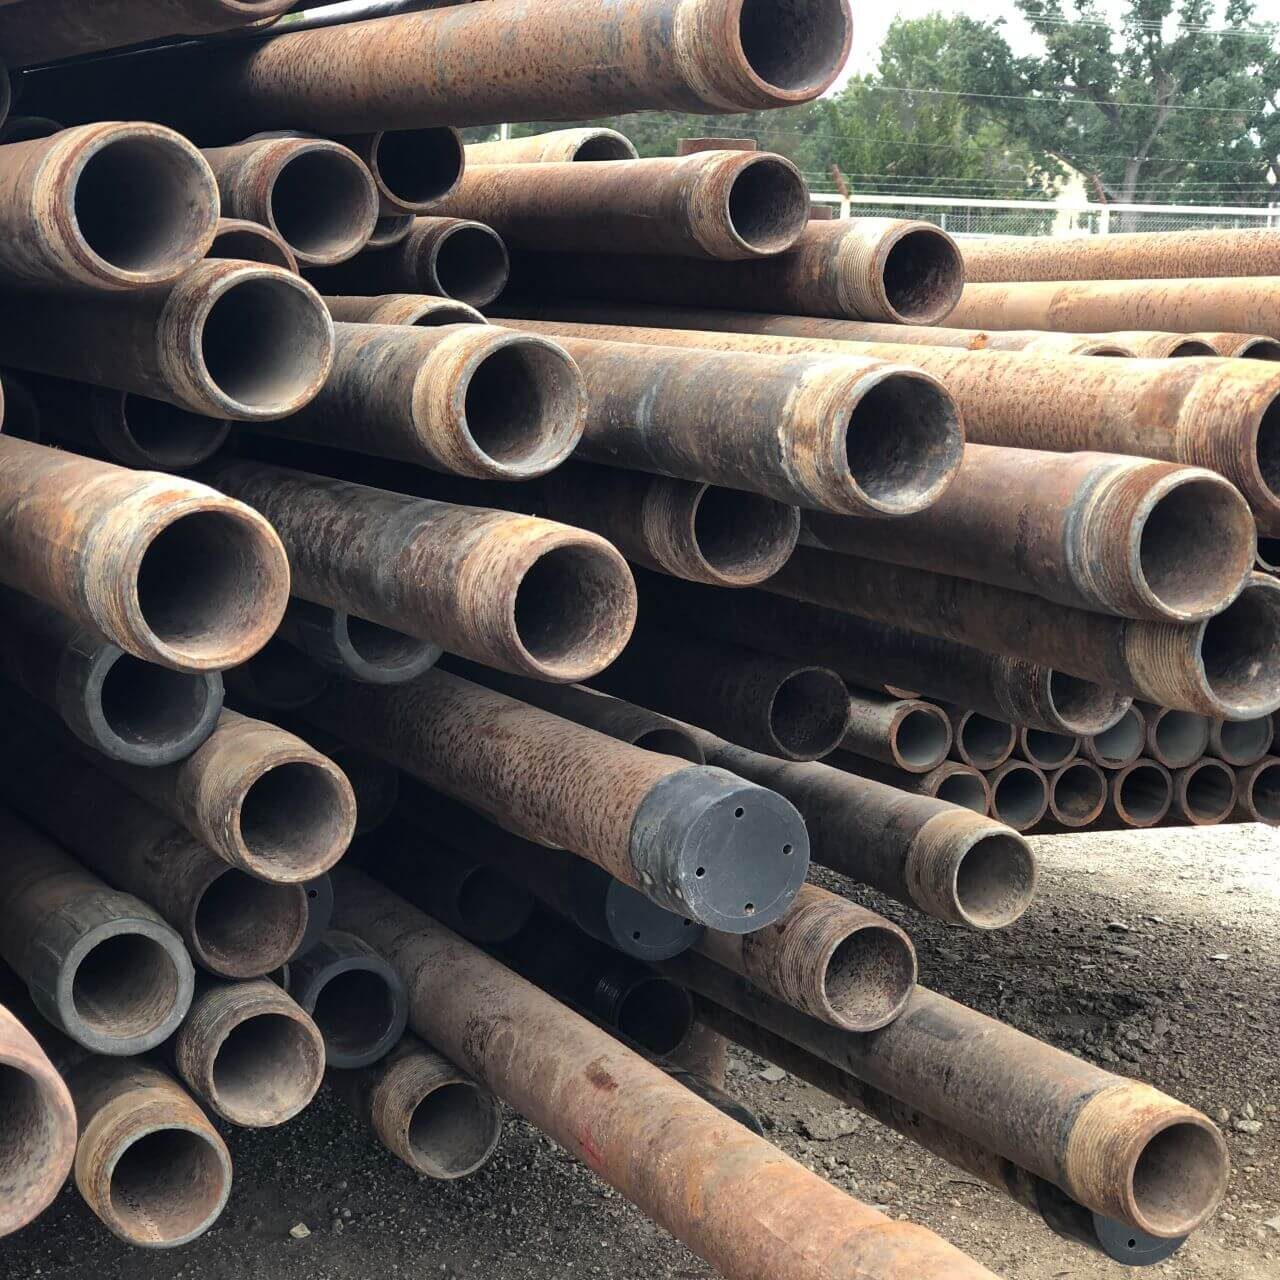 A pile of pipes sitting on top of the ground.